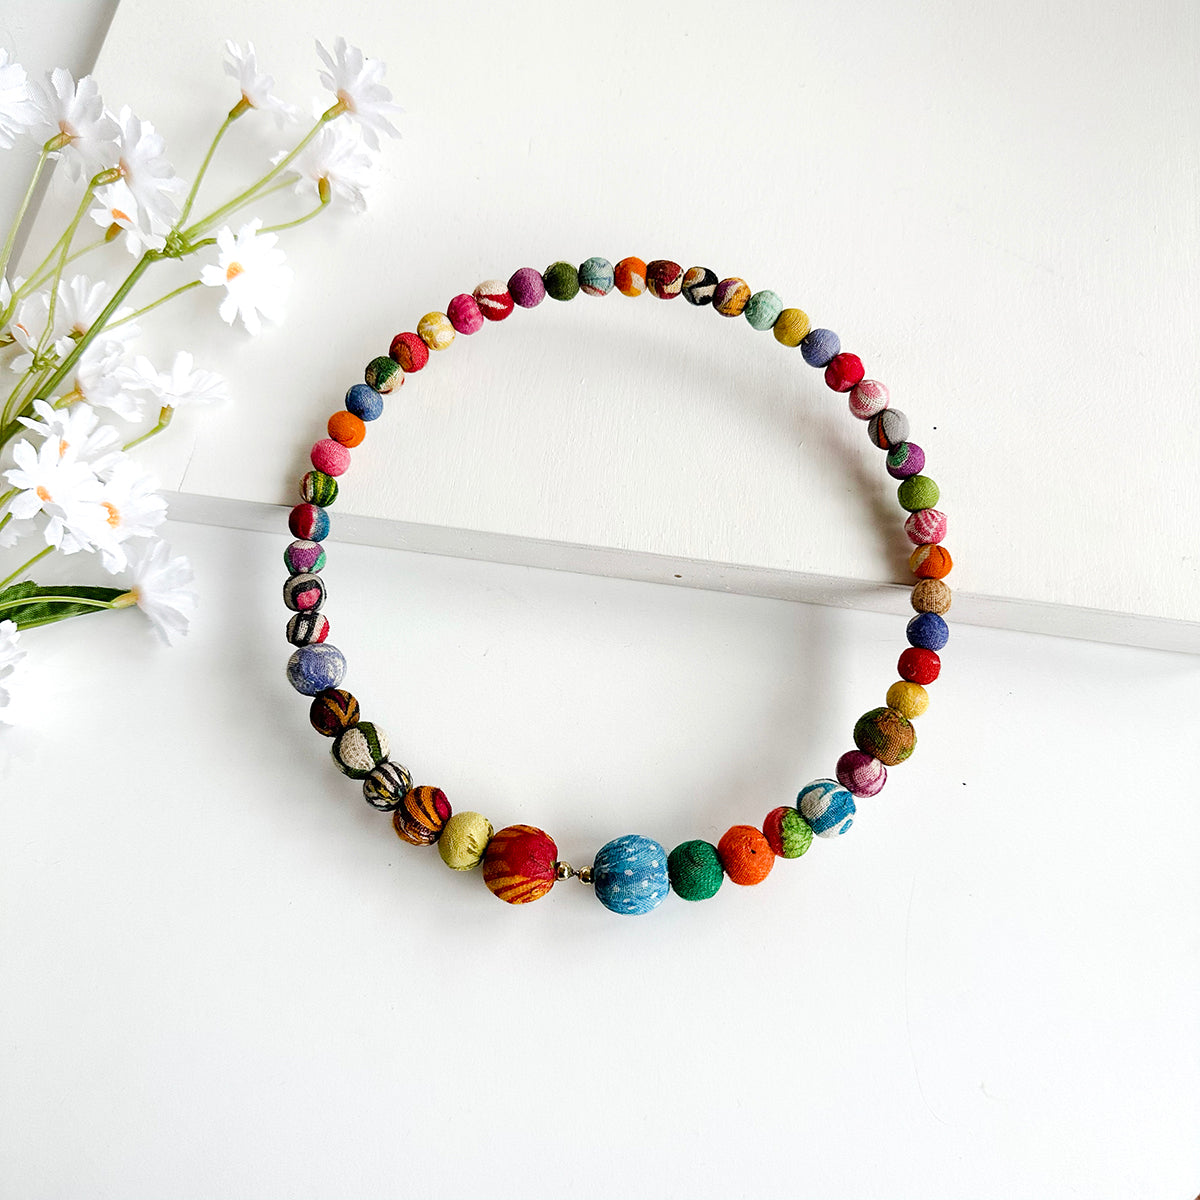 Angelco Accessories kantha choker - colourful kantha beads on memory wire